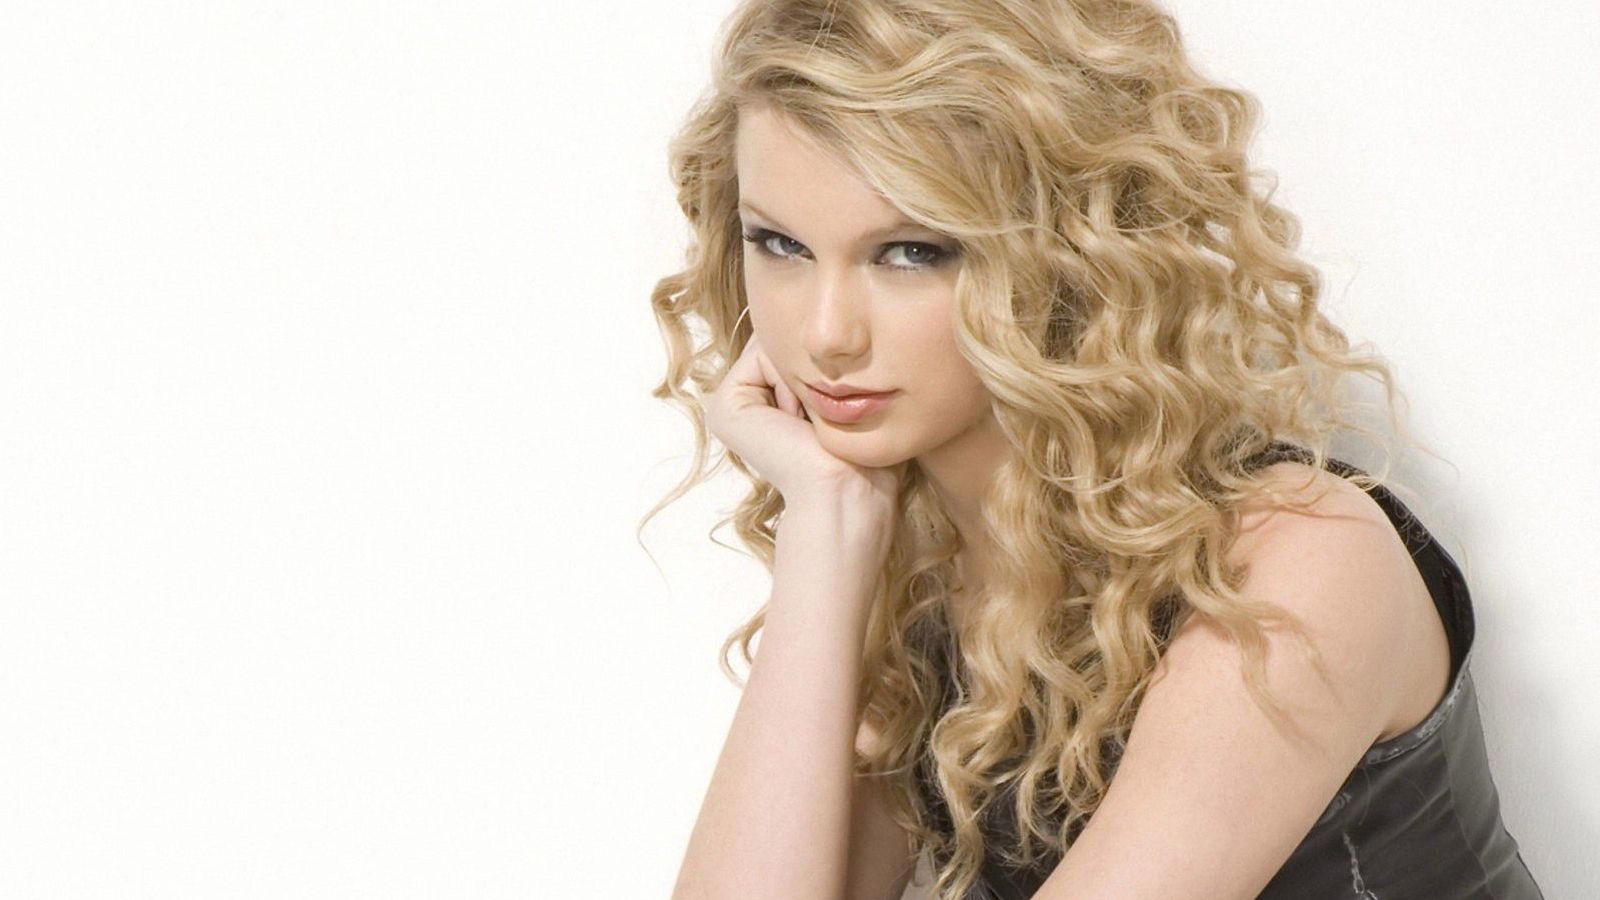 Free download Wallpaper New Movies wallpaper for PC Taylor Swift HD Wallpaper [1600x1200] for your Desktop, Mobile & Tablet. Explore Taylor Swift Wallpaper for Computer. Best Taylor Swift Wallpaper